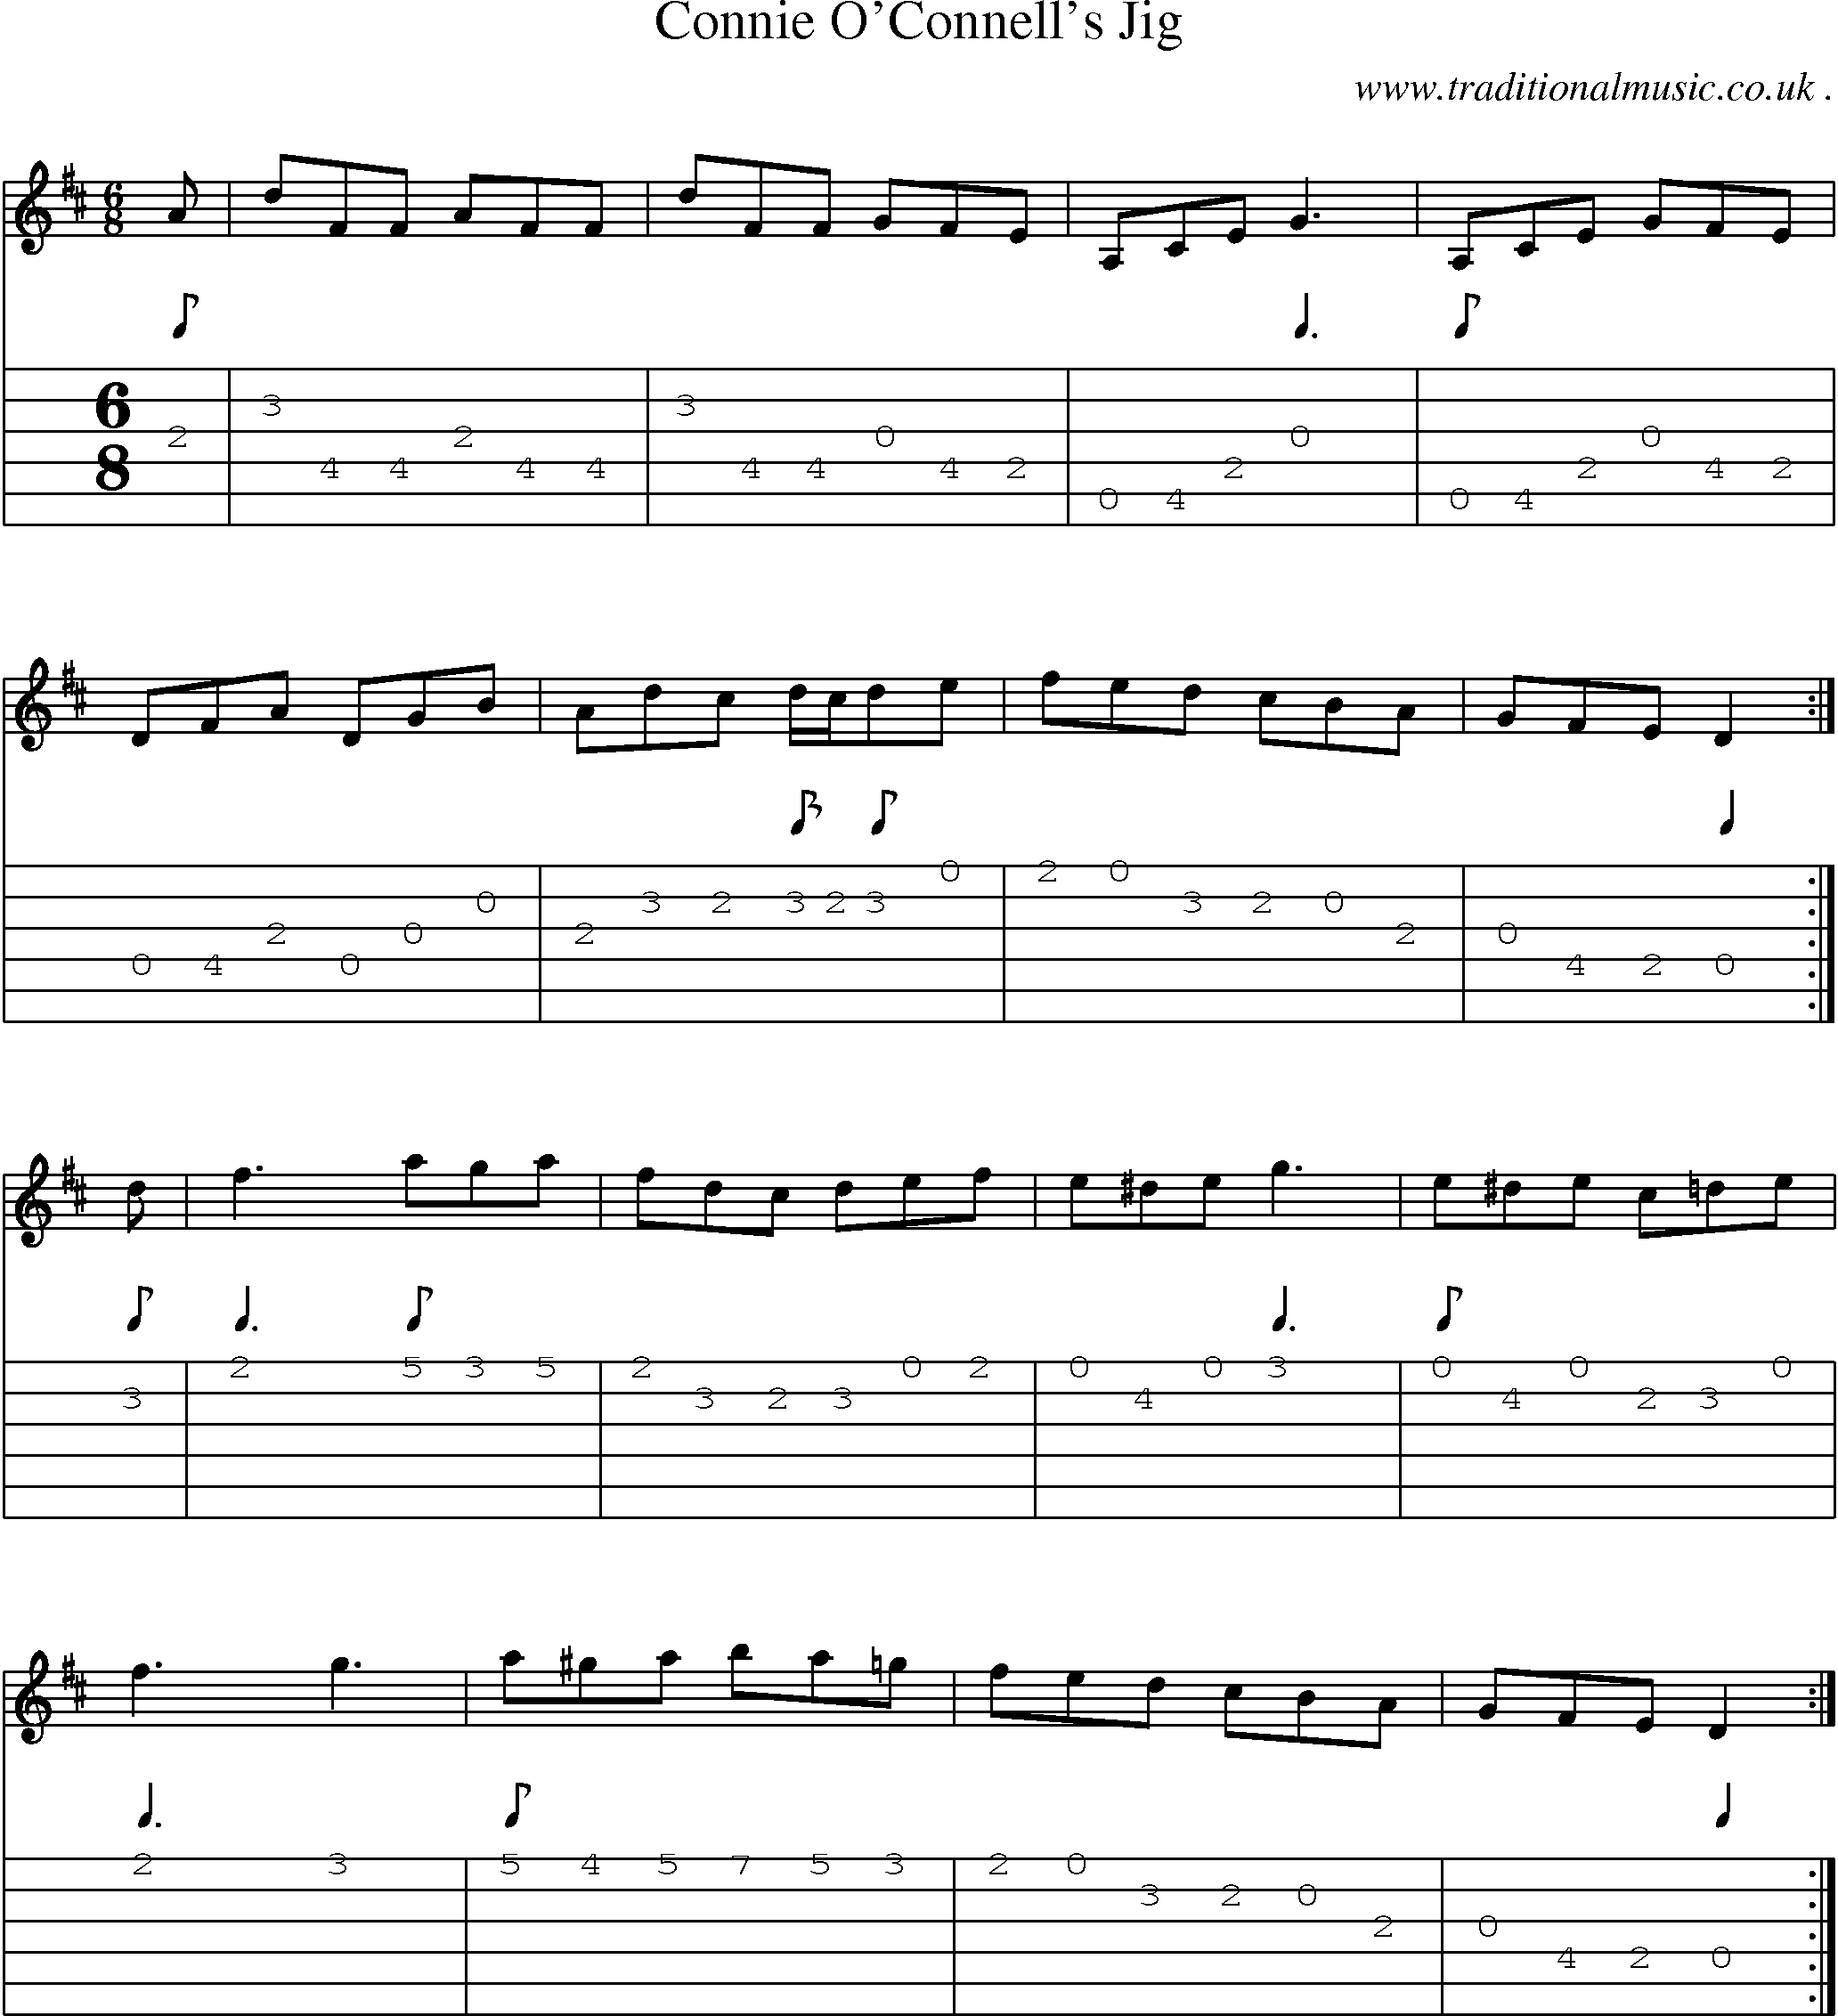 Sheet-Music and Guitar Tabs for Connie Oconnells Jig